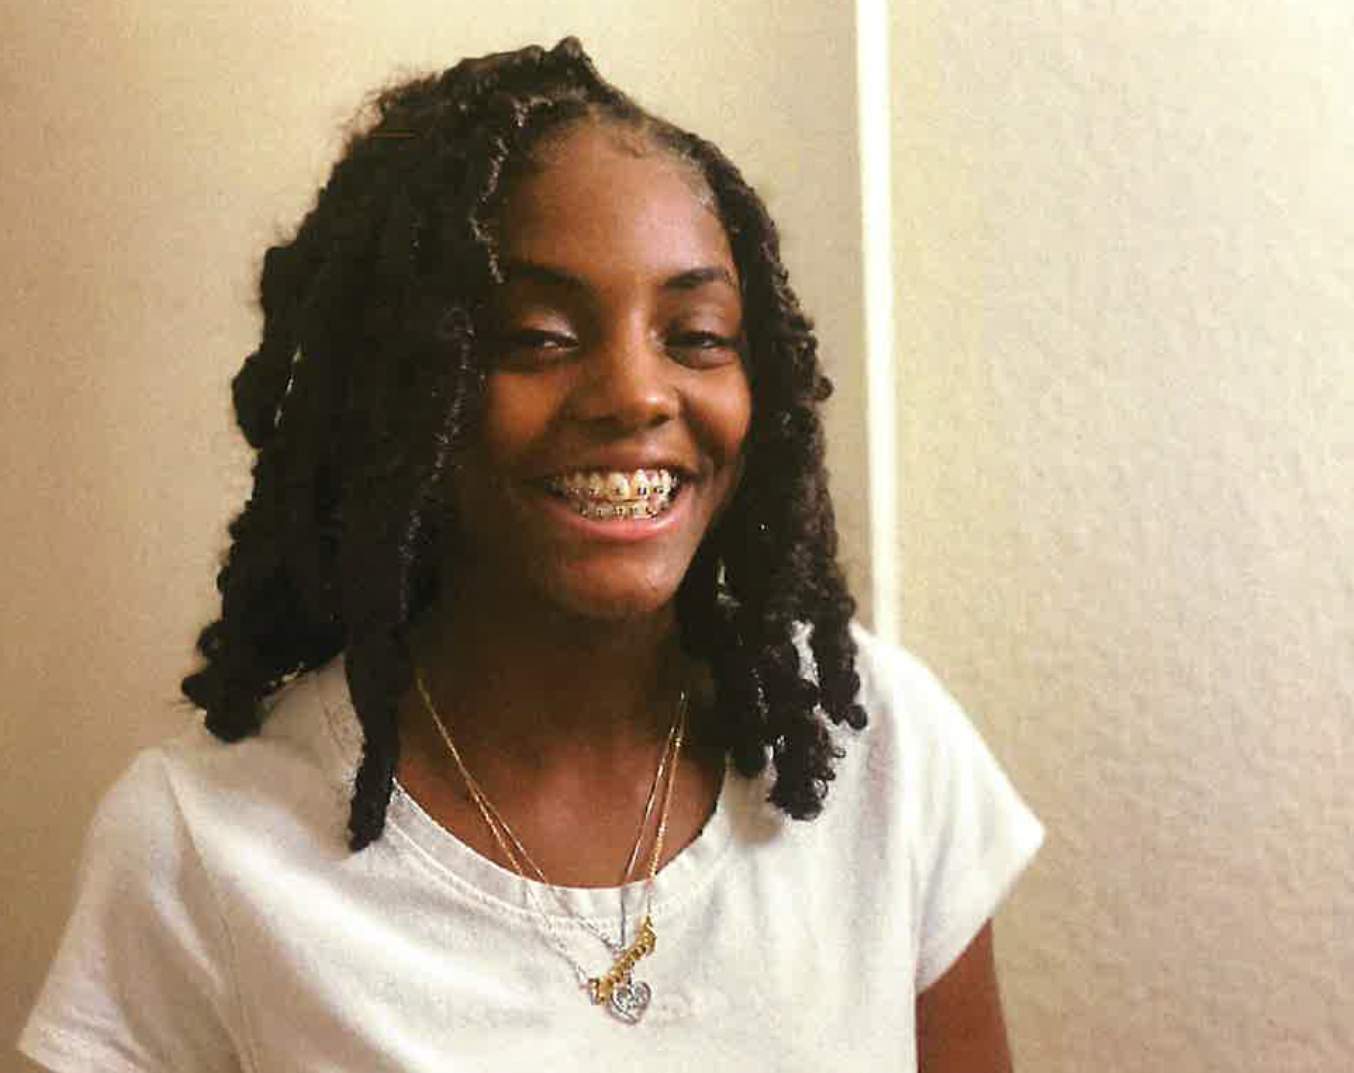 Police seek teenage girl who went missing while visiting family in Detroit